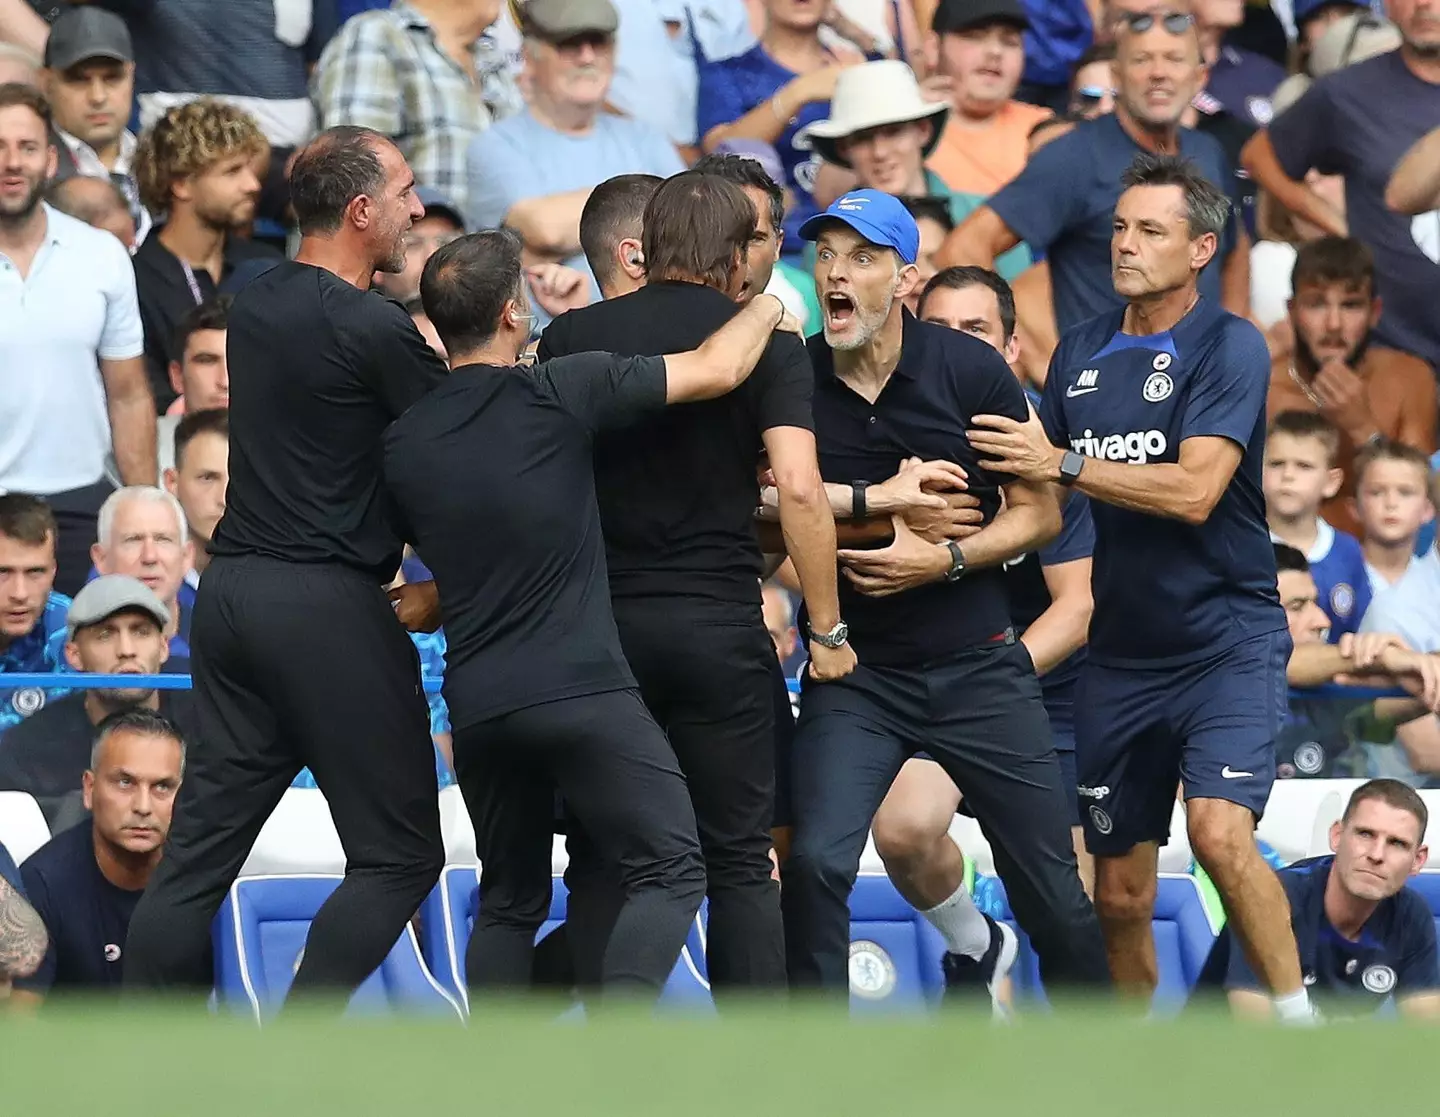 Thomas Tuchel, Manager of Chelsea and Antonio Conte, Manager of Tottenham Hotspur clash after Pierre-Emile Hojbjerg of Tottenham Hotspur scores to make it 1-1 during the Premier League match at Stamford Bridge, London. (Alamy)